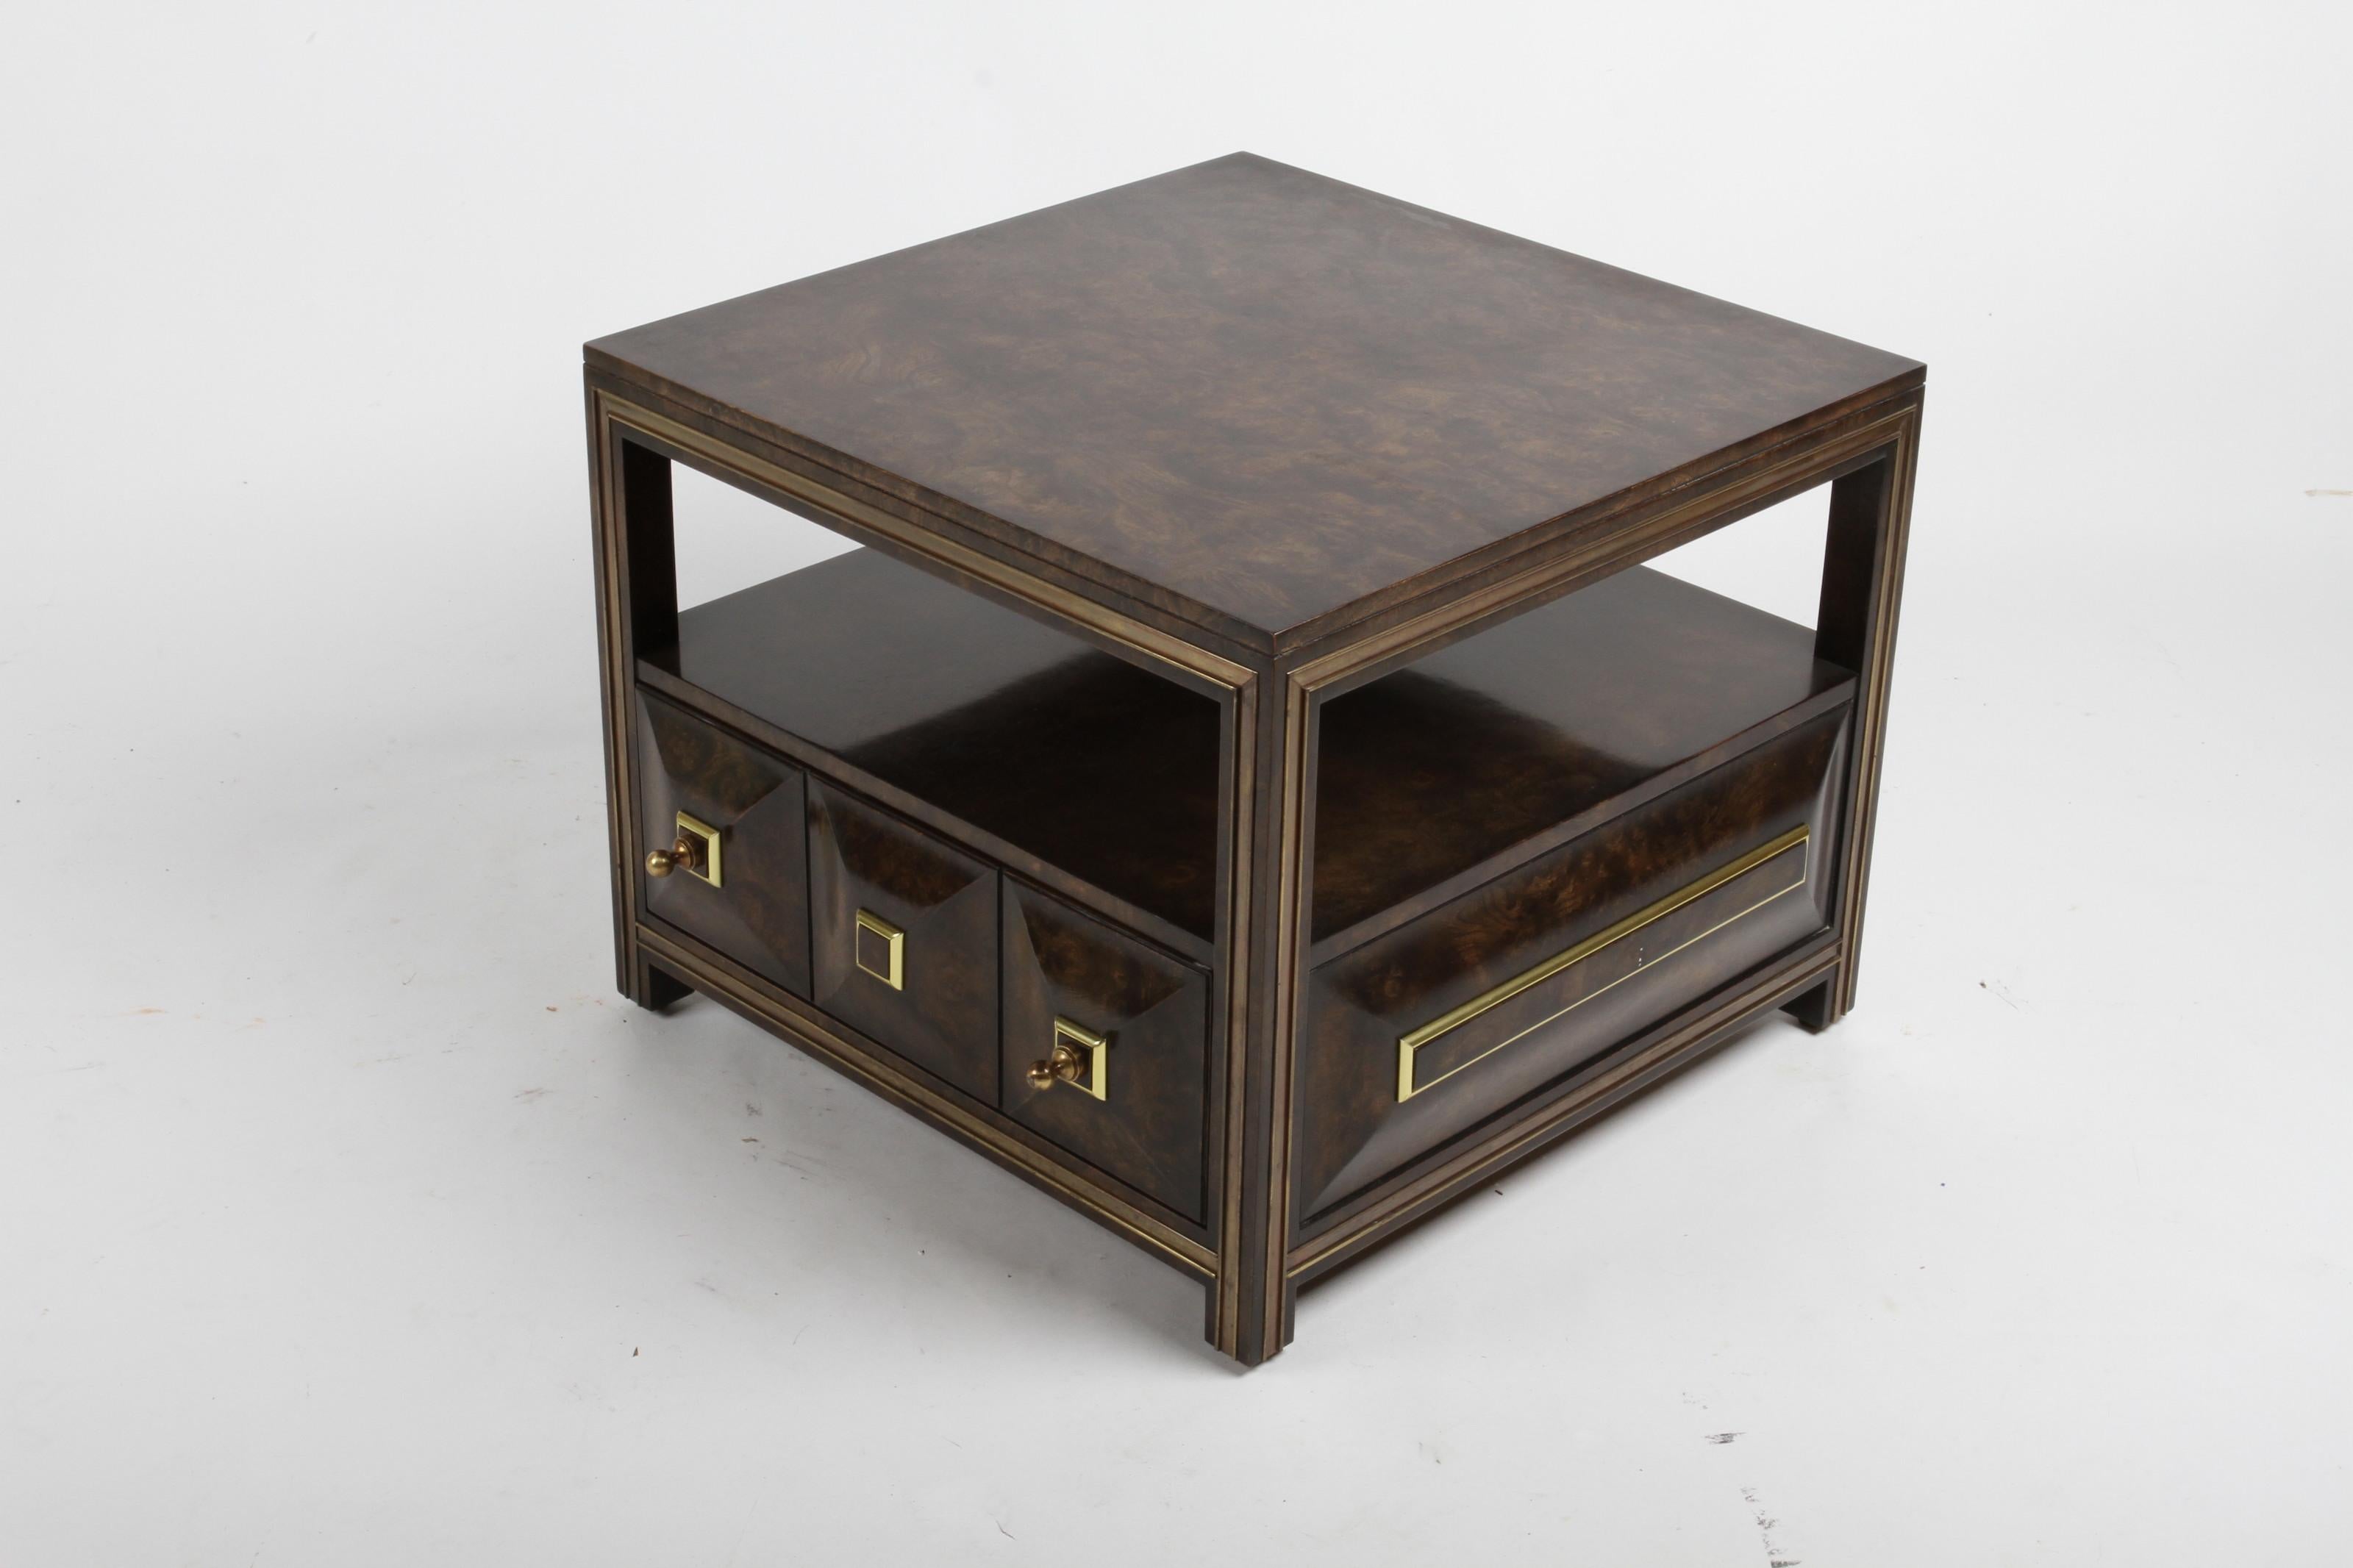 Pair of Large Mastercraft Burl Elm & Brass End Tables or Night Stands w/ Drawers For Sale 1